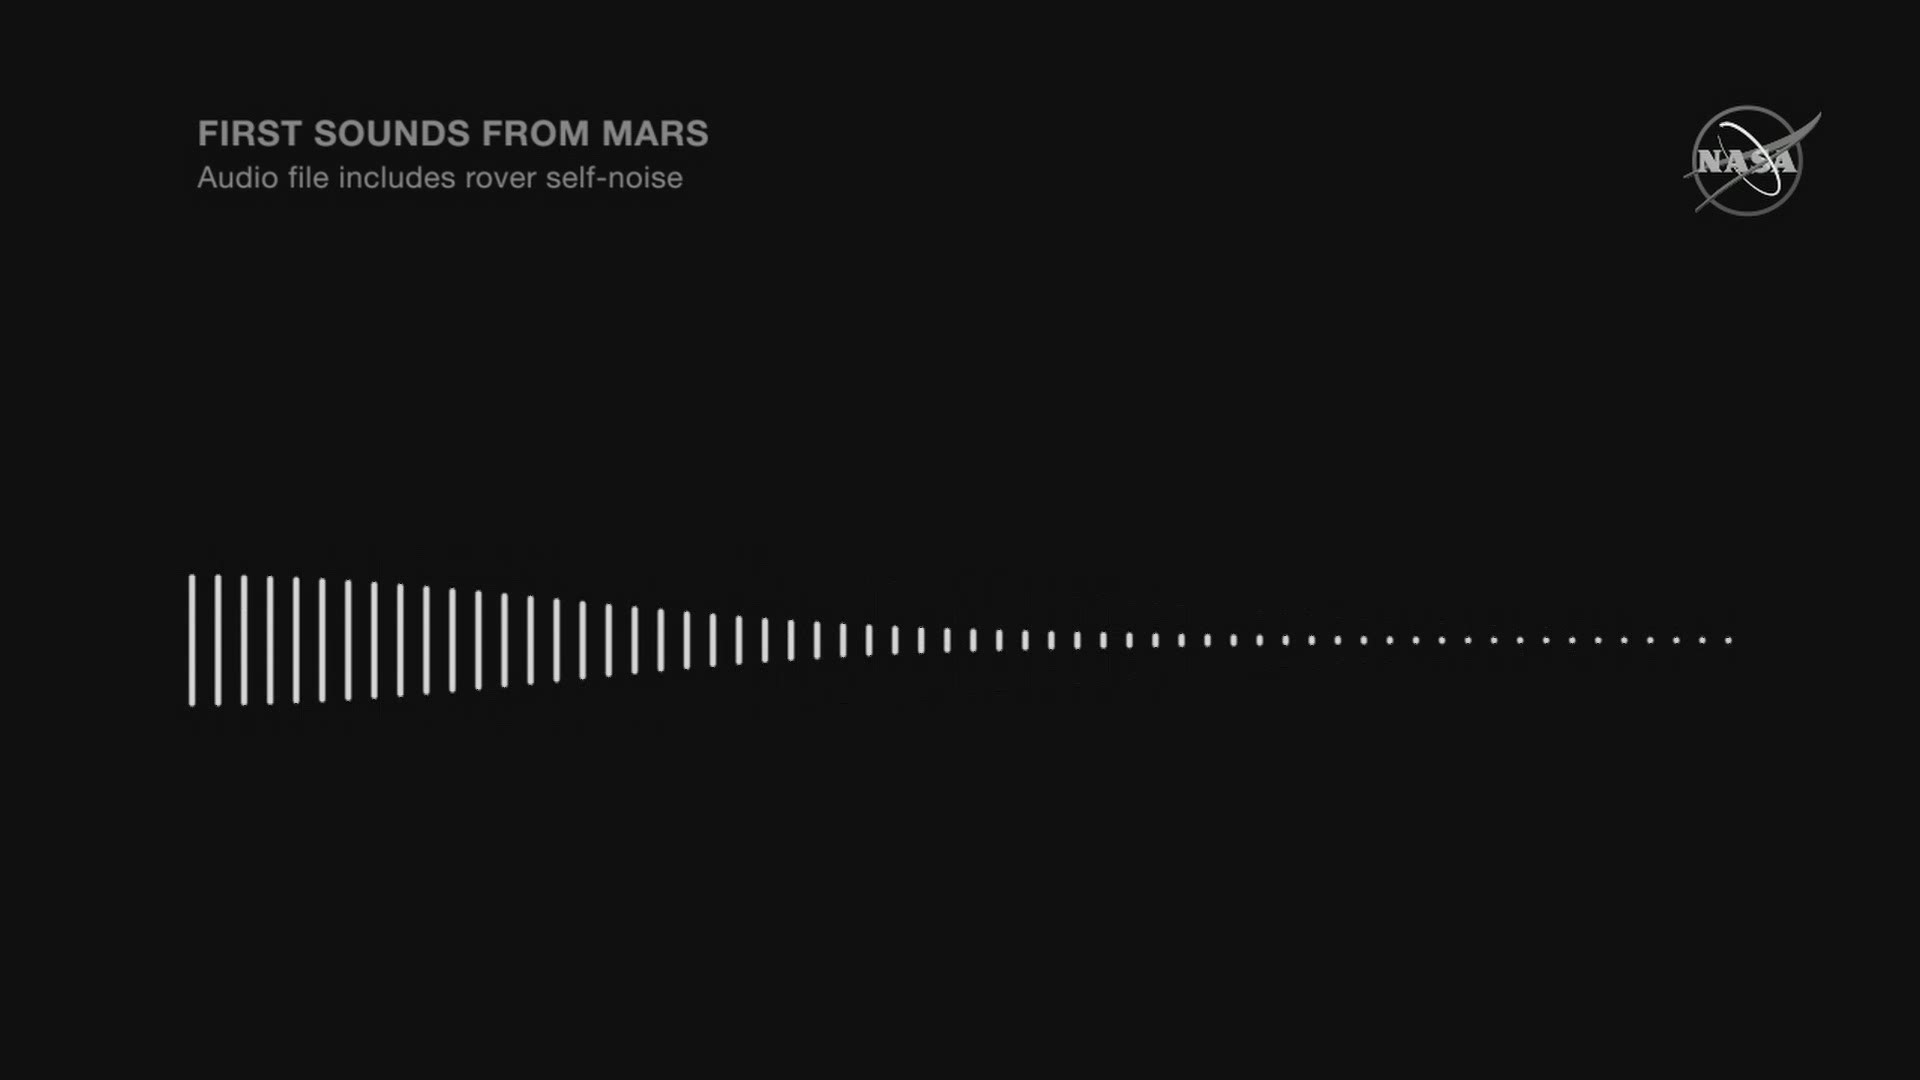 For the first time ever, microphones have captured sounds from the surface of Mars. (Courtesy: NASA TV)